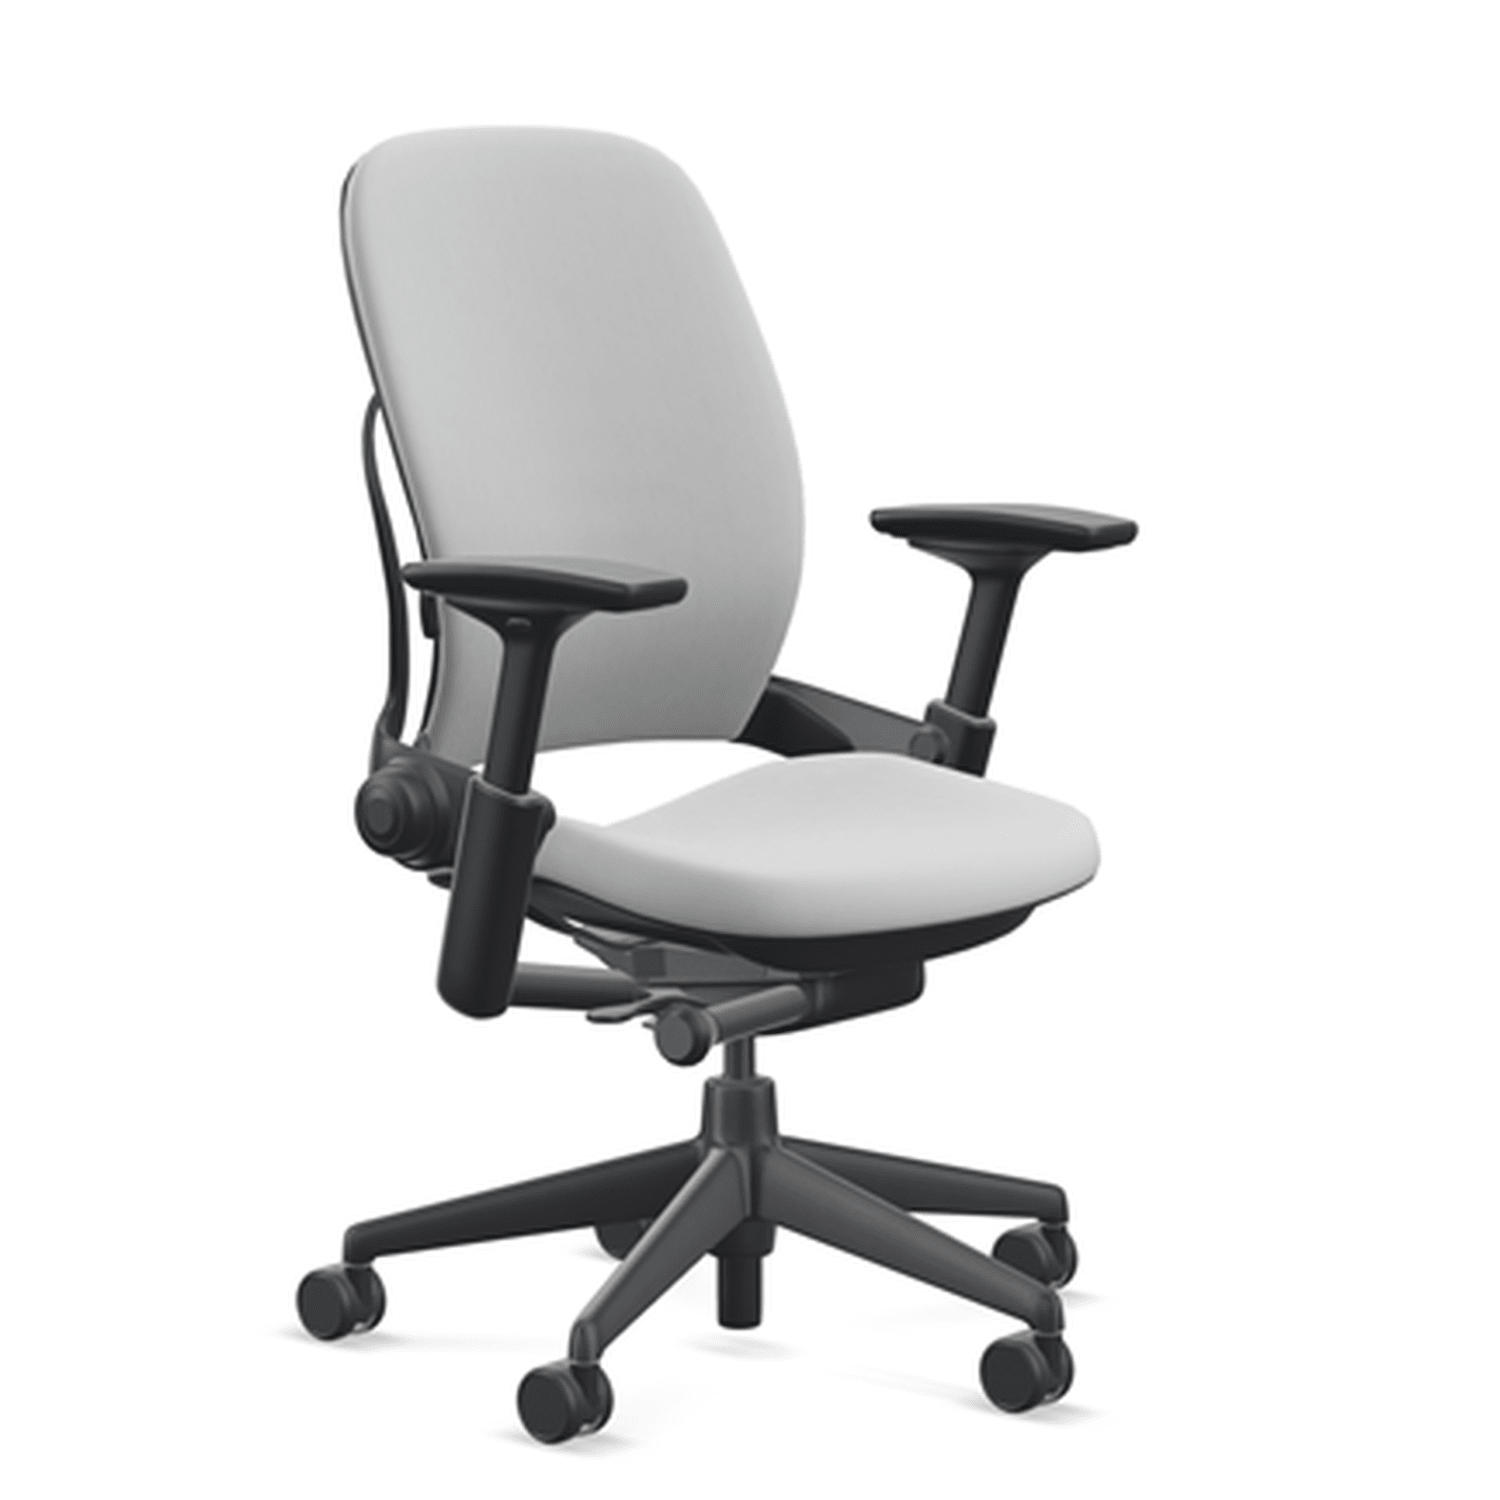 6 Work-from-Home Ergonomic Chair Recommendations